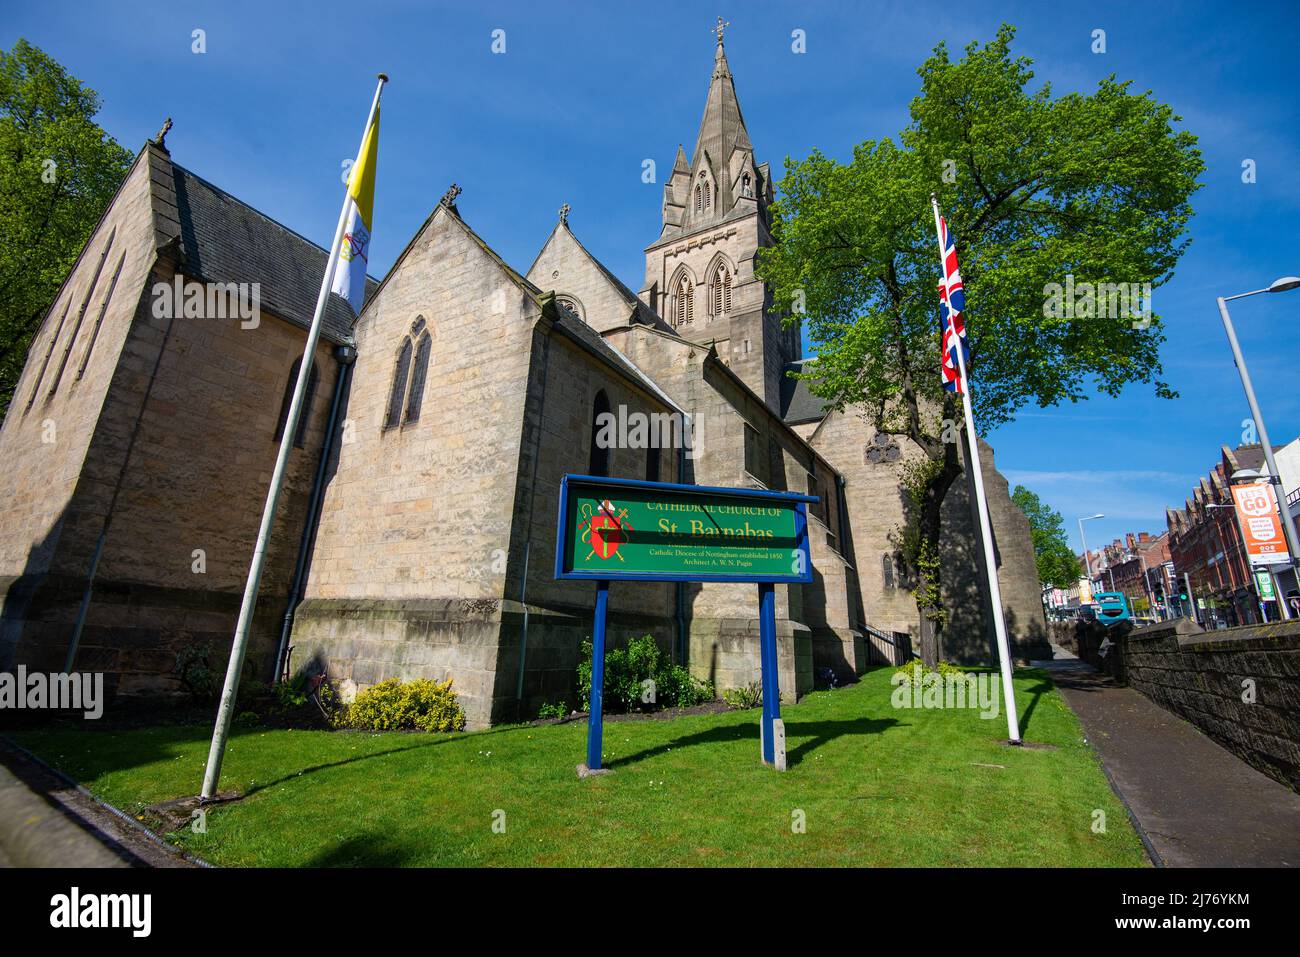 The Cathedral Church of St. Barnabas in the city of Nottingham, England, Stock Photo